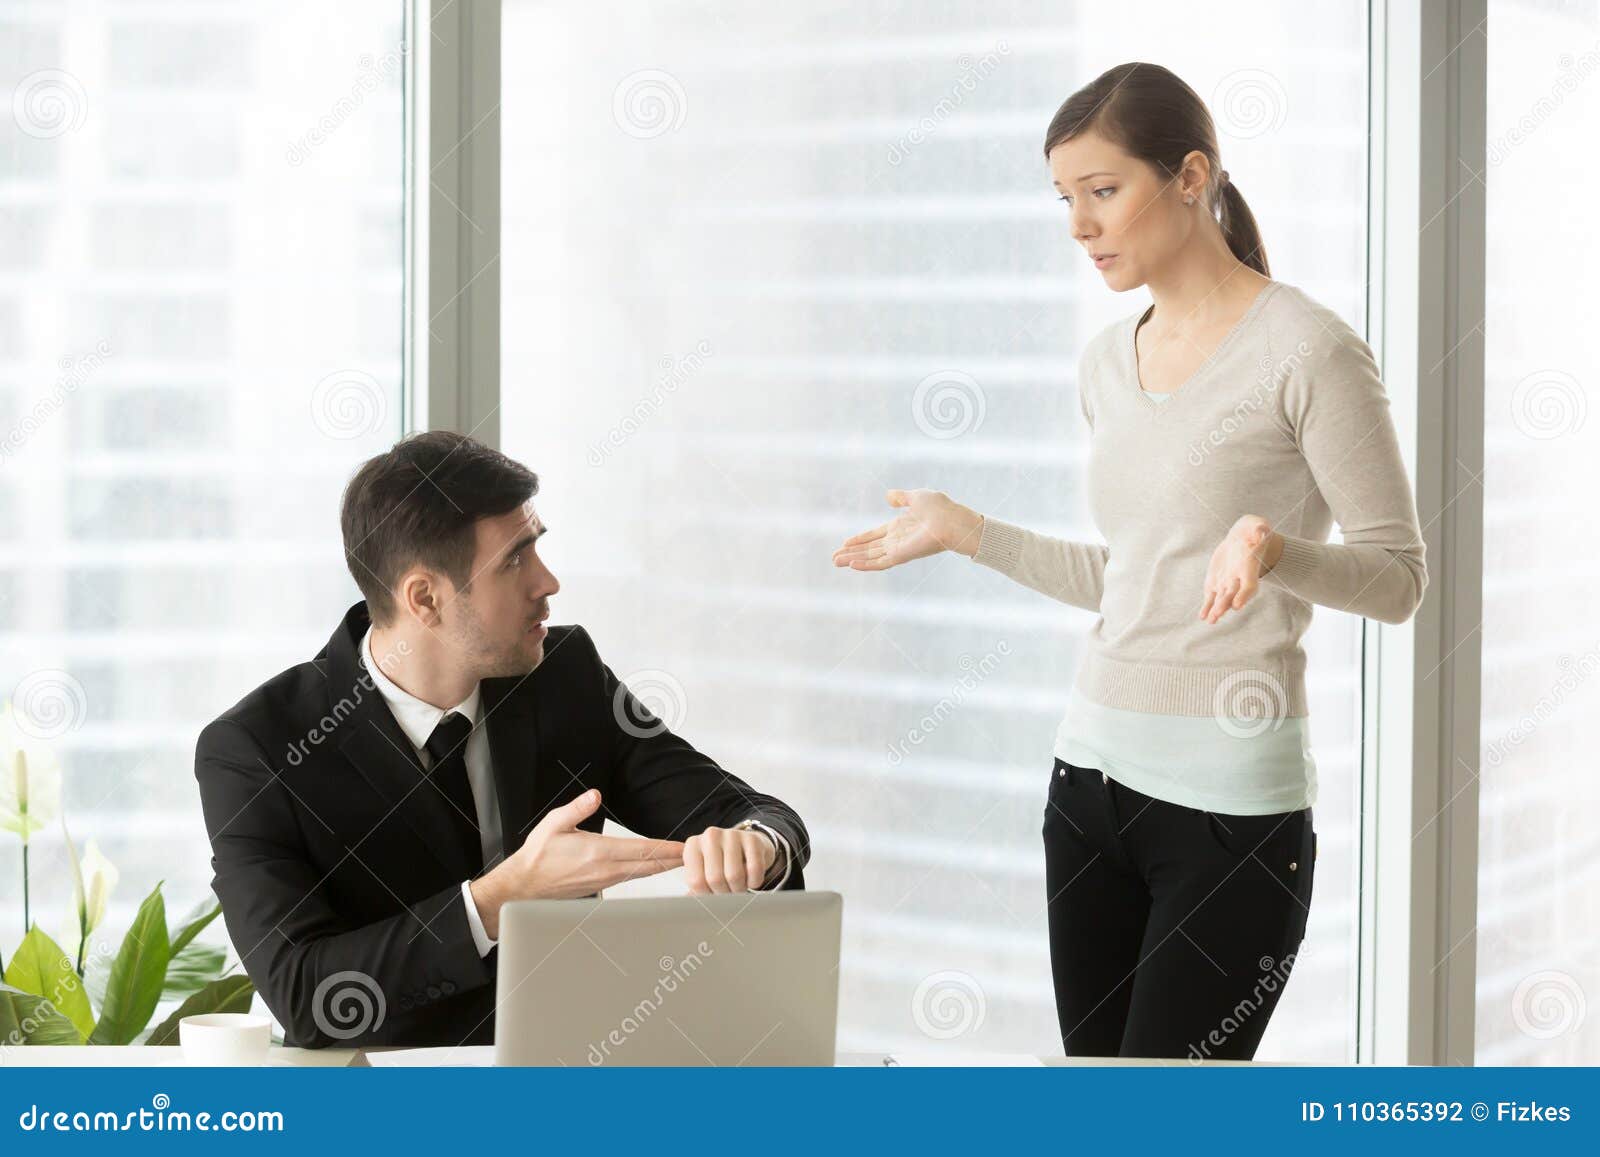 woman explaining reason for being late for work